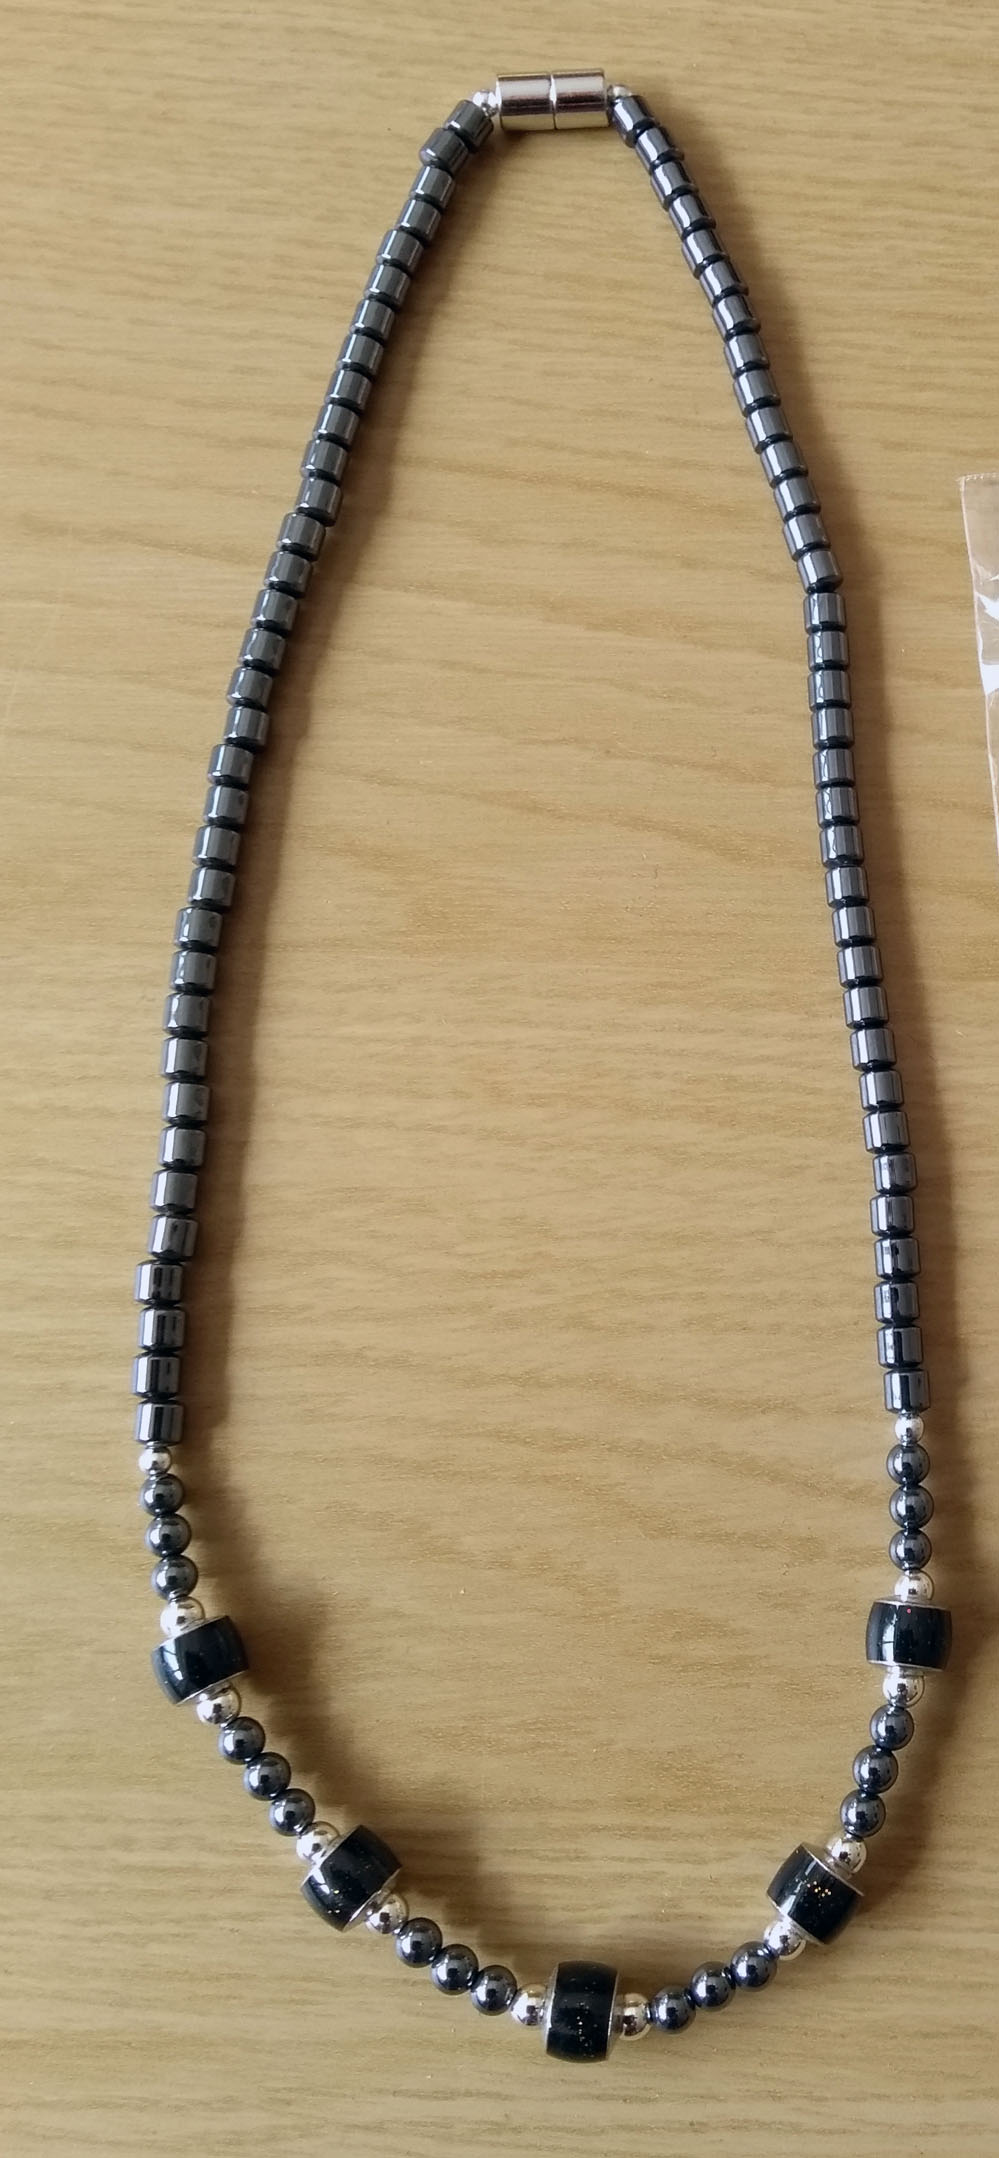 Haematite and Mood Bead Necklace Design 105